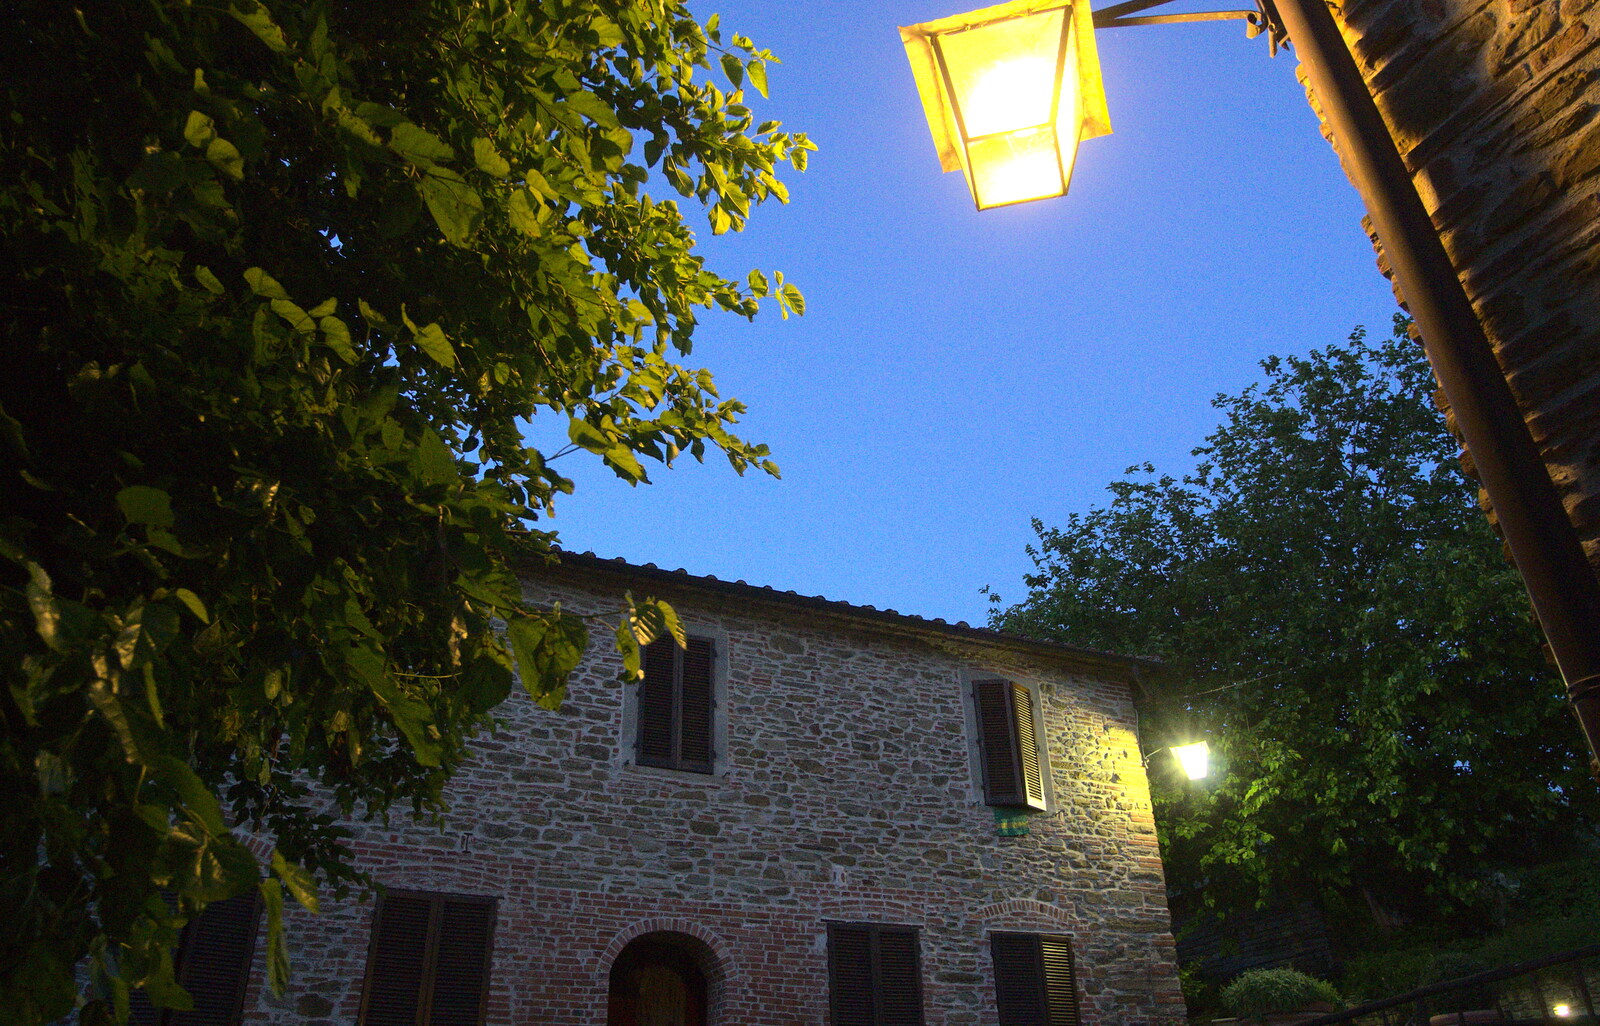 Evening light from Italian Weddings, Saracens and Swimming Pools, Arezzo, Tuscany - 12th June 2013